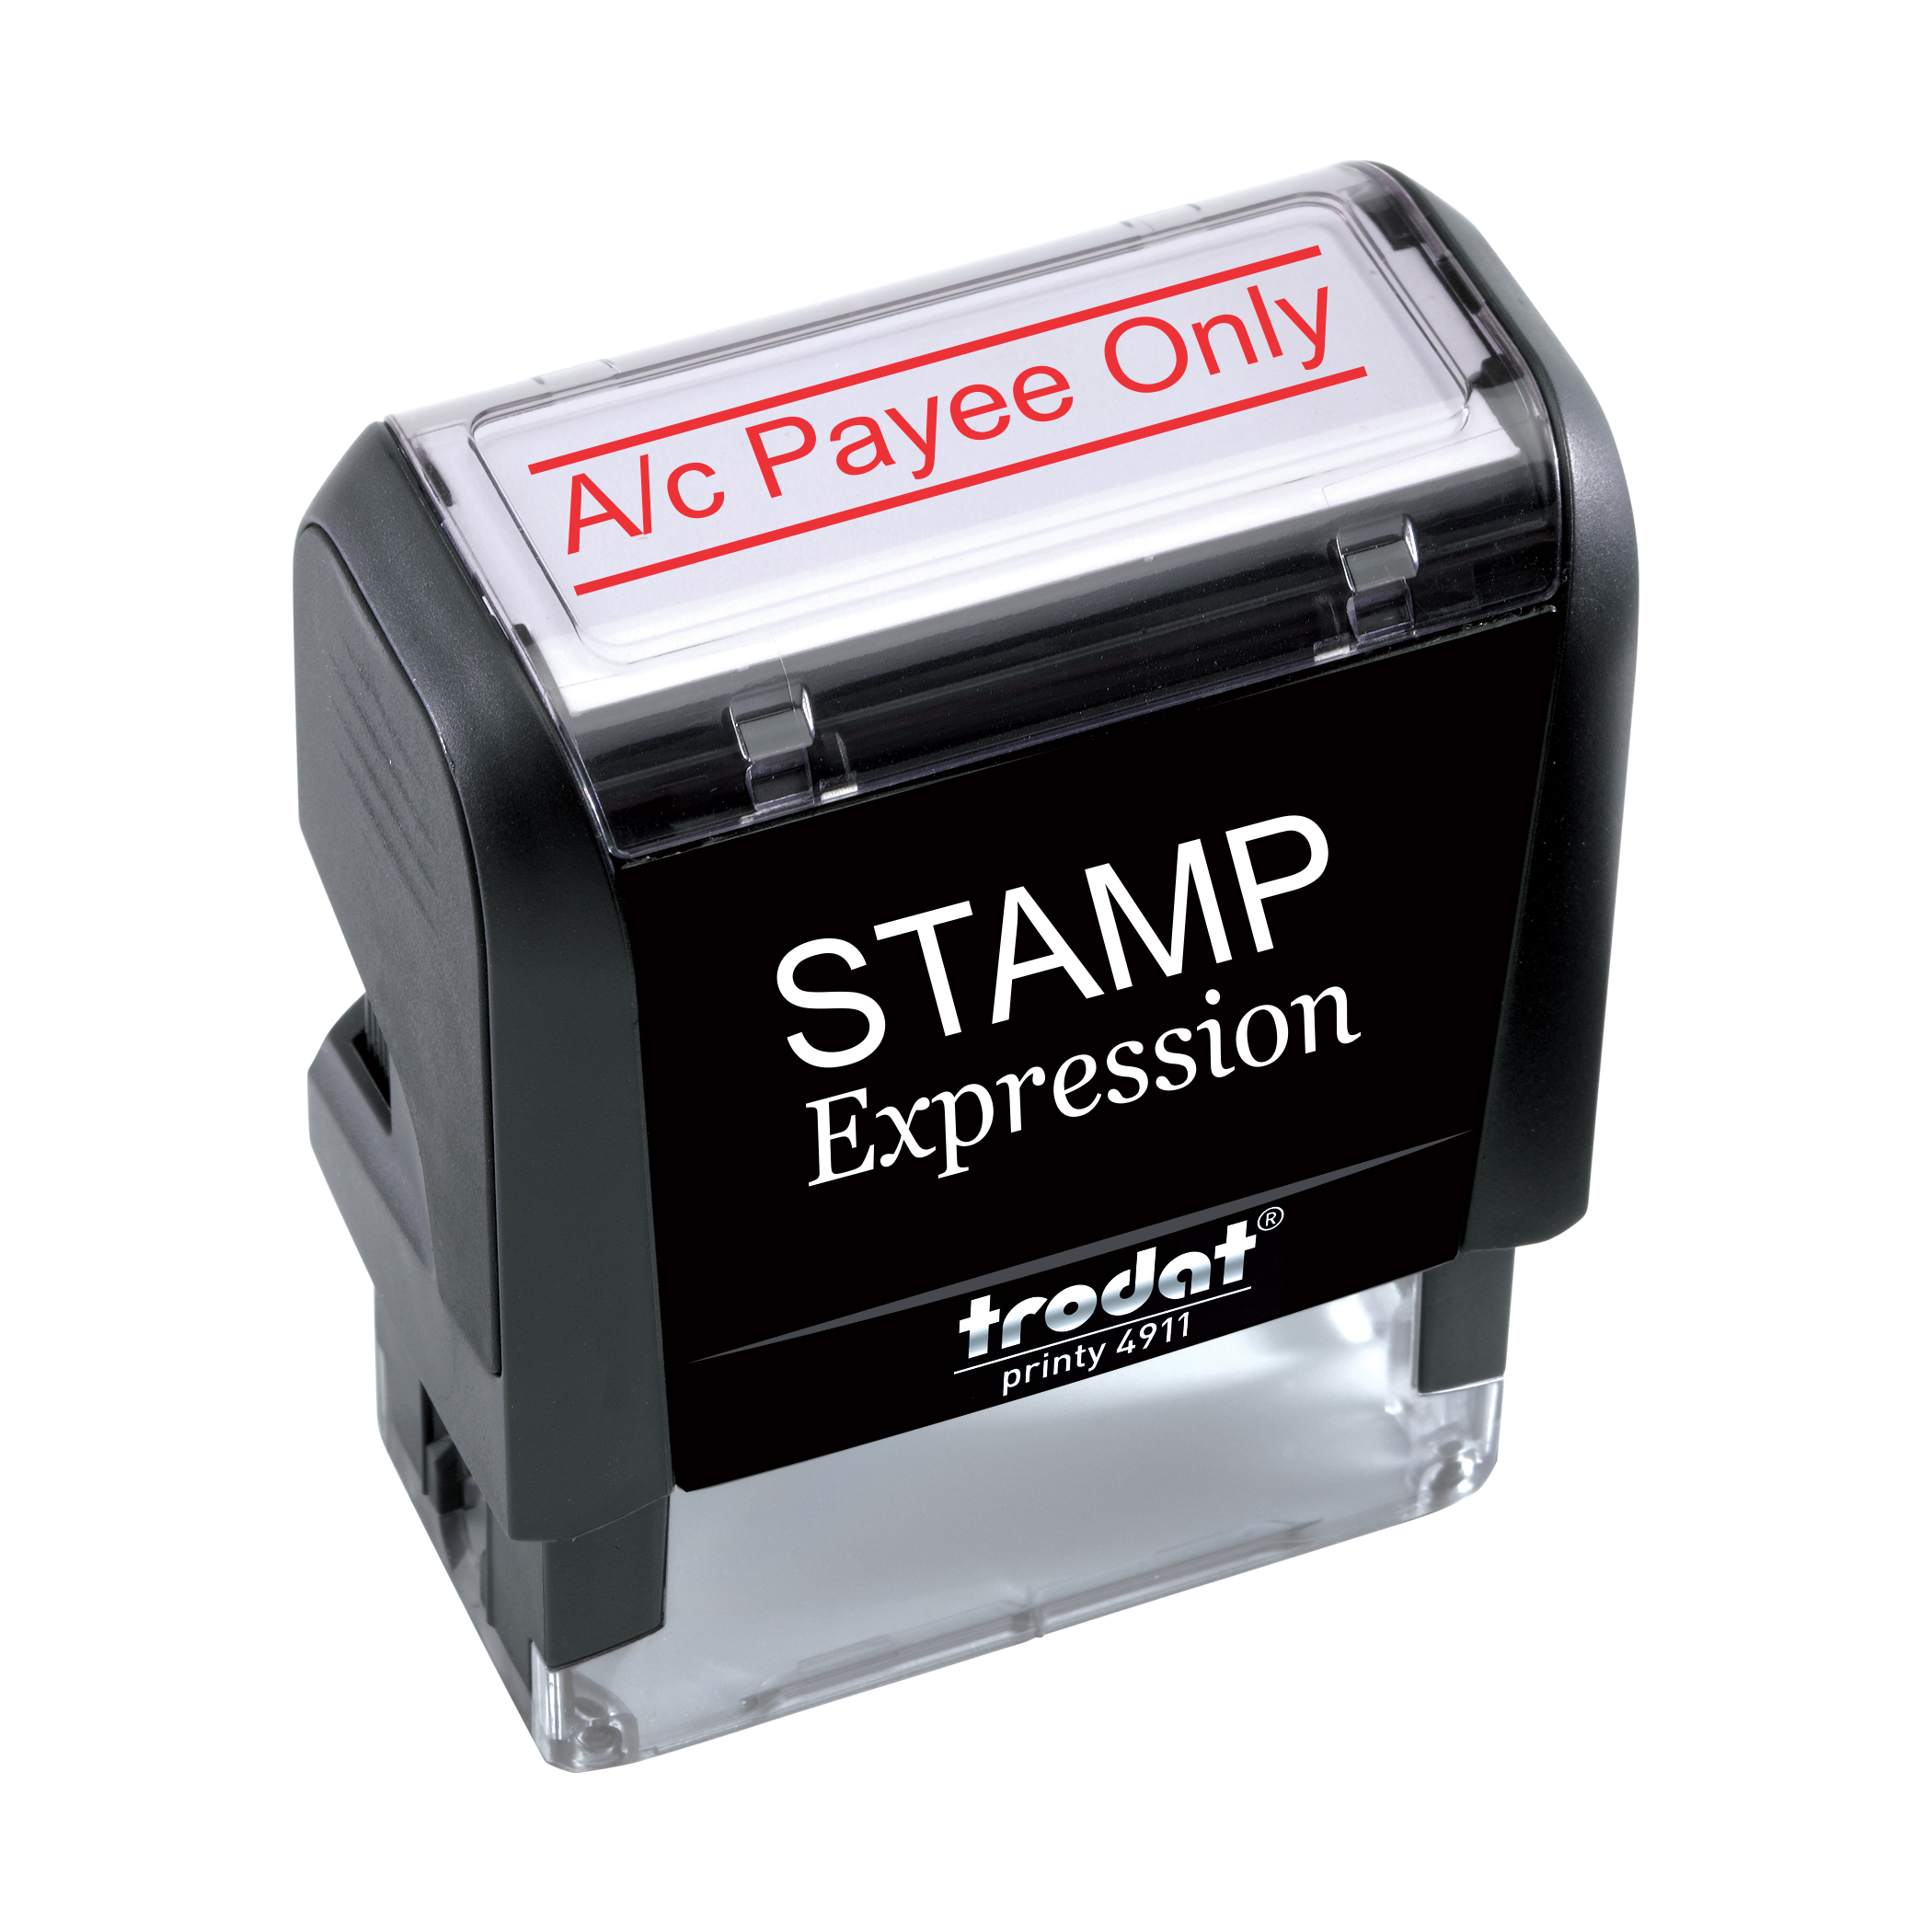 A/C Payee Only Office Self Inking Rubber Stamp